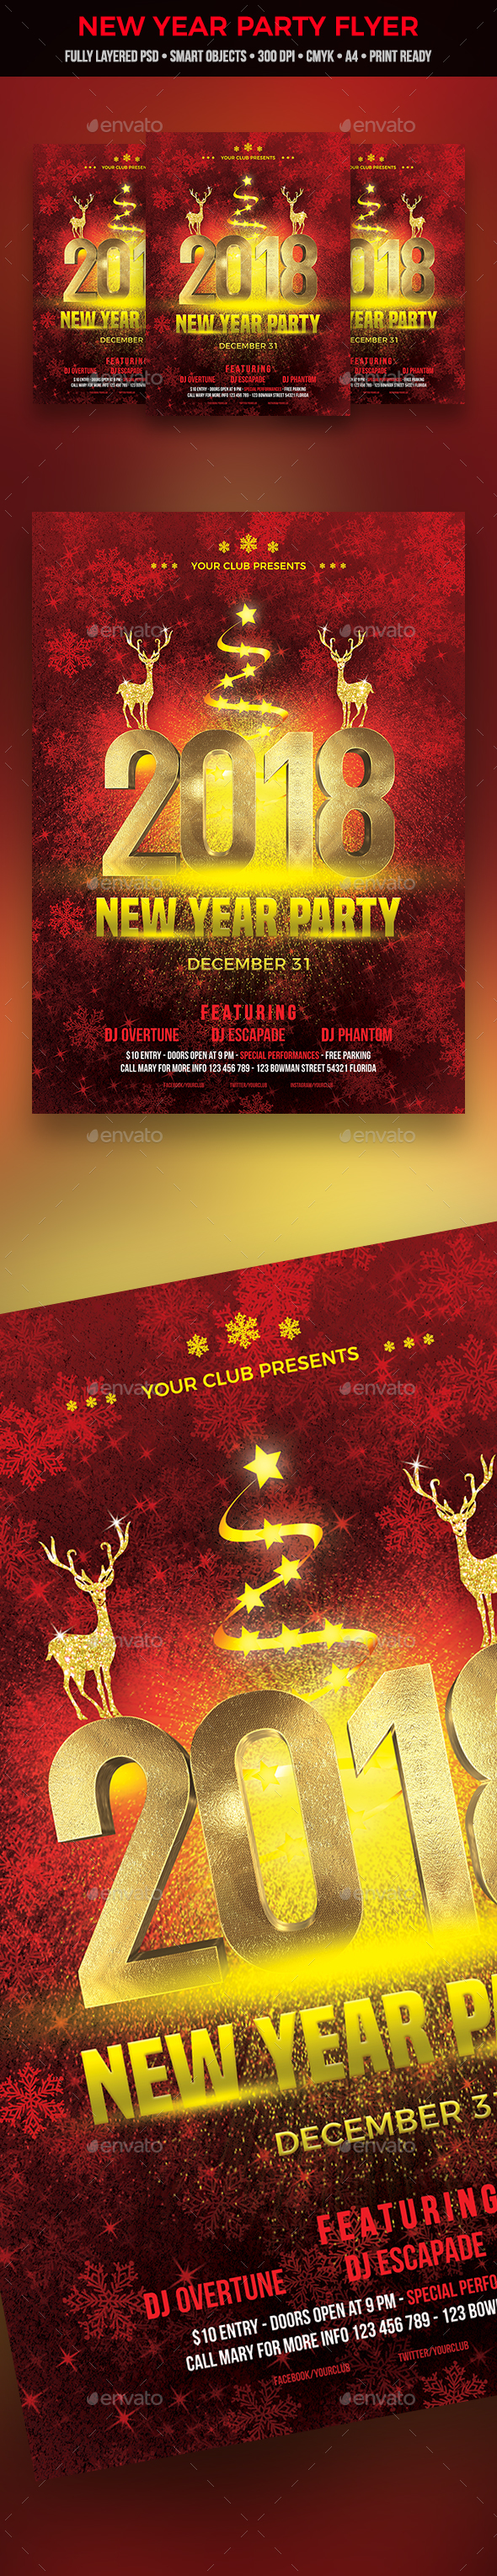 GraphicRiver New Year Party Flyer 20849114